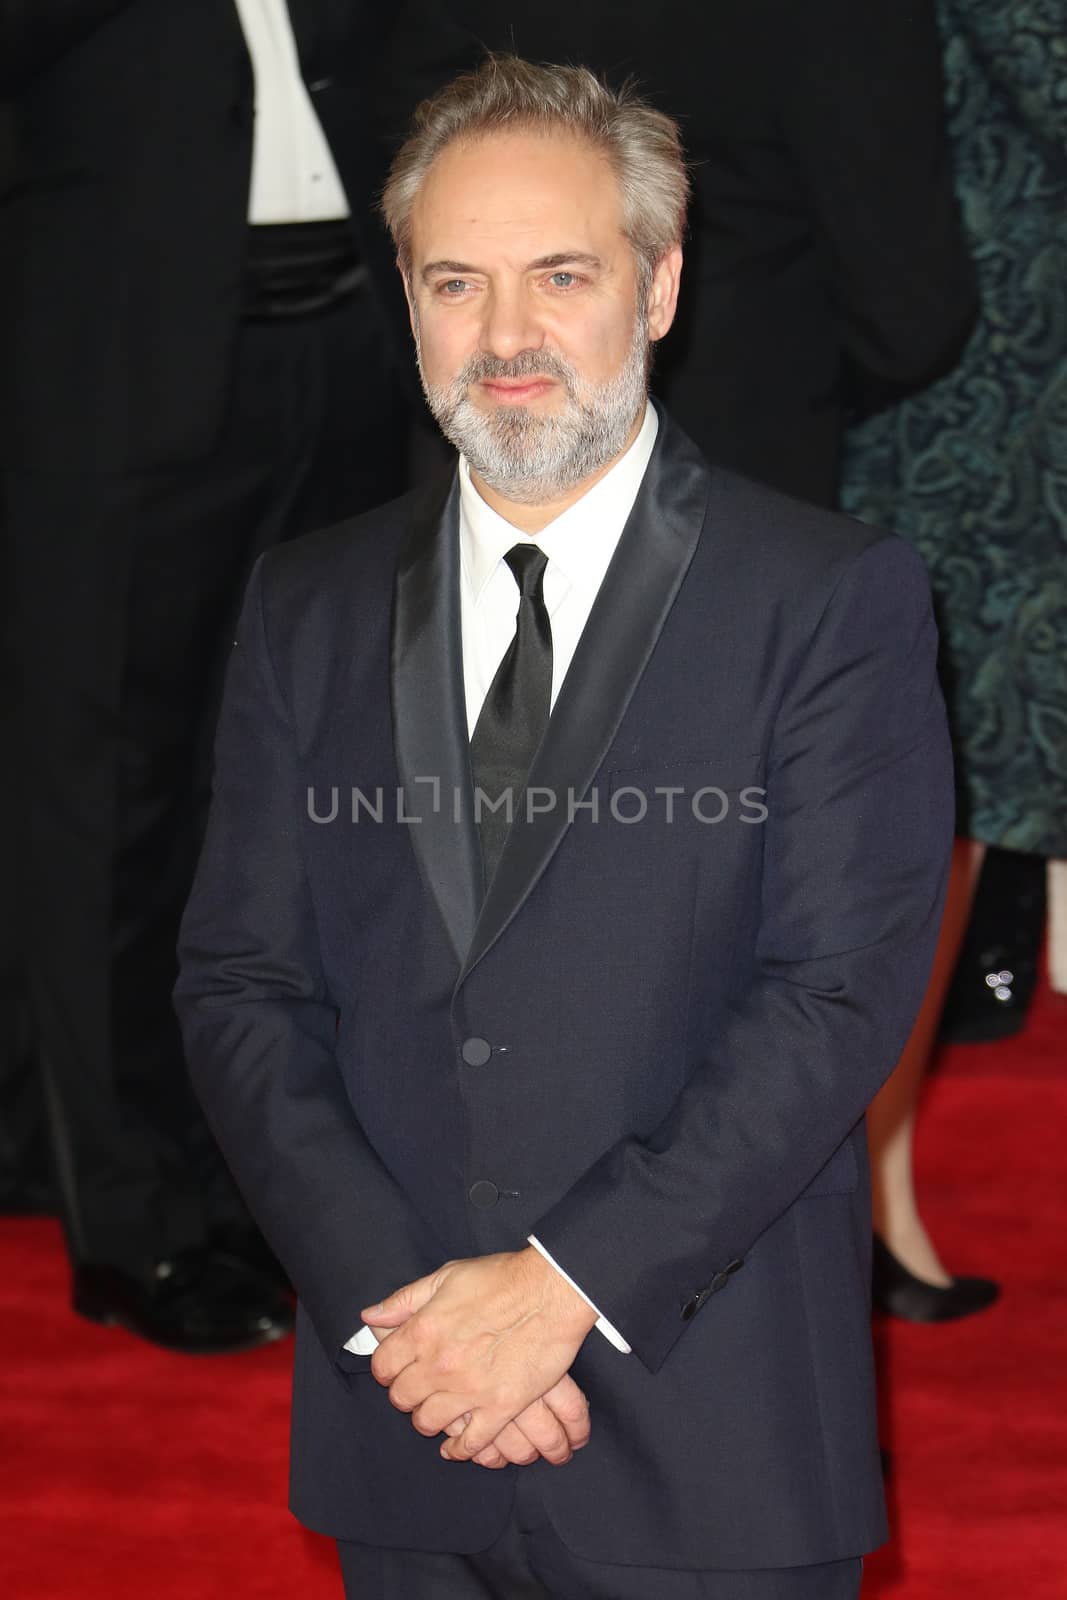 UNITED KINGDOM, London: Sam Mendes attends the world premiere of the latest Bond film, Spectre, at Royal Albert Hall in London on October 26, 2015.